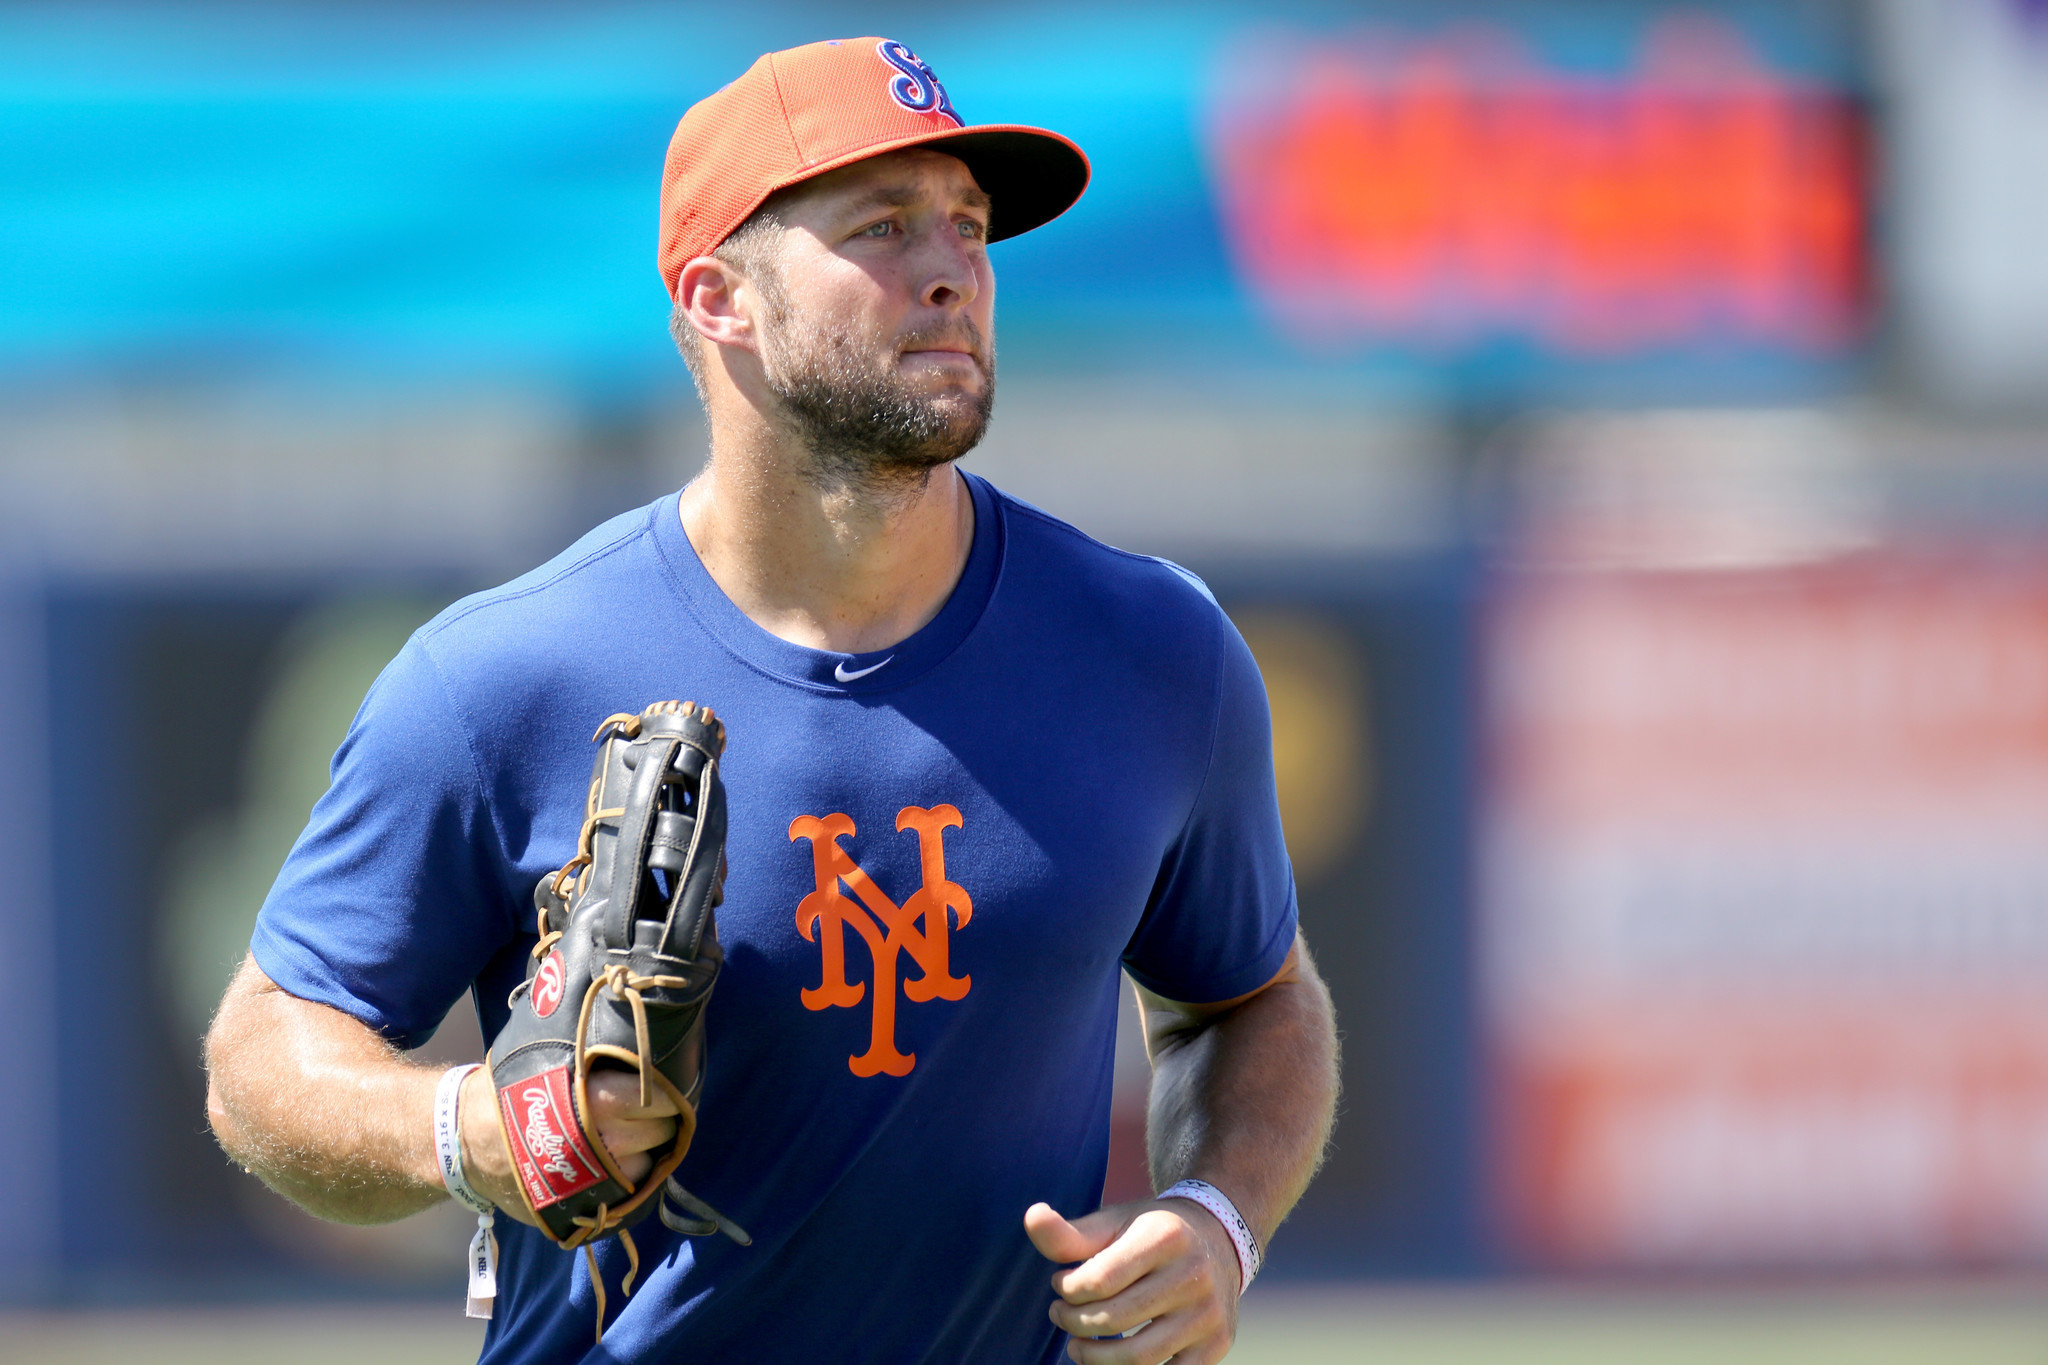 Tim Tebow has an 8-game hitting streak going for St. Lucie - Orlando Sentinel2048 x 1365